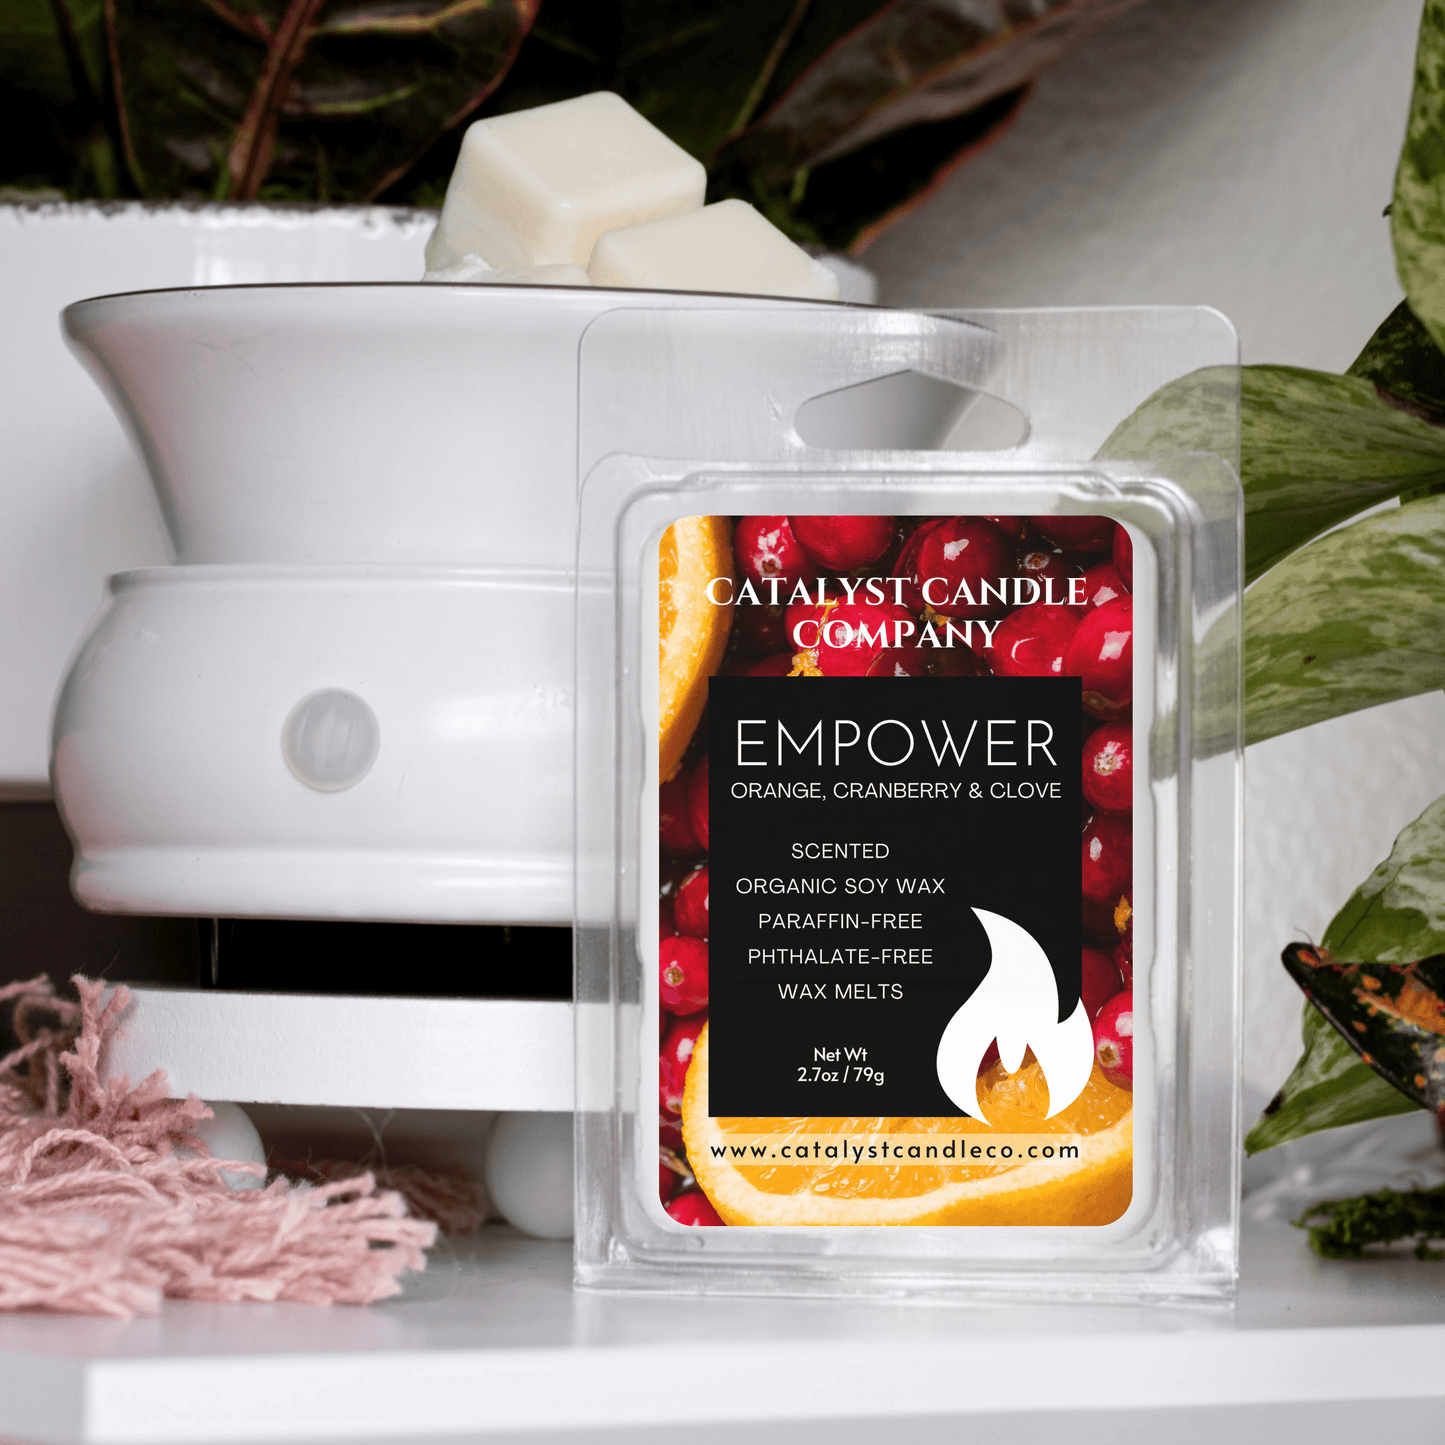 Orange, cranberry and clove scented wax melts. soy wax melts. citrus aroma. holiday scent. Catalyst Candle Company. LLC